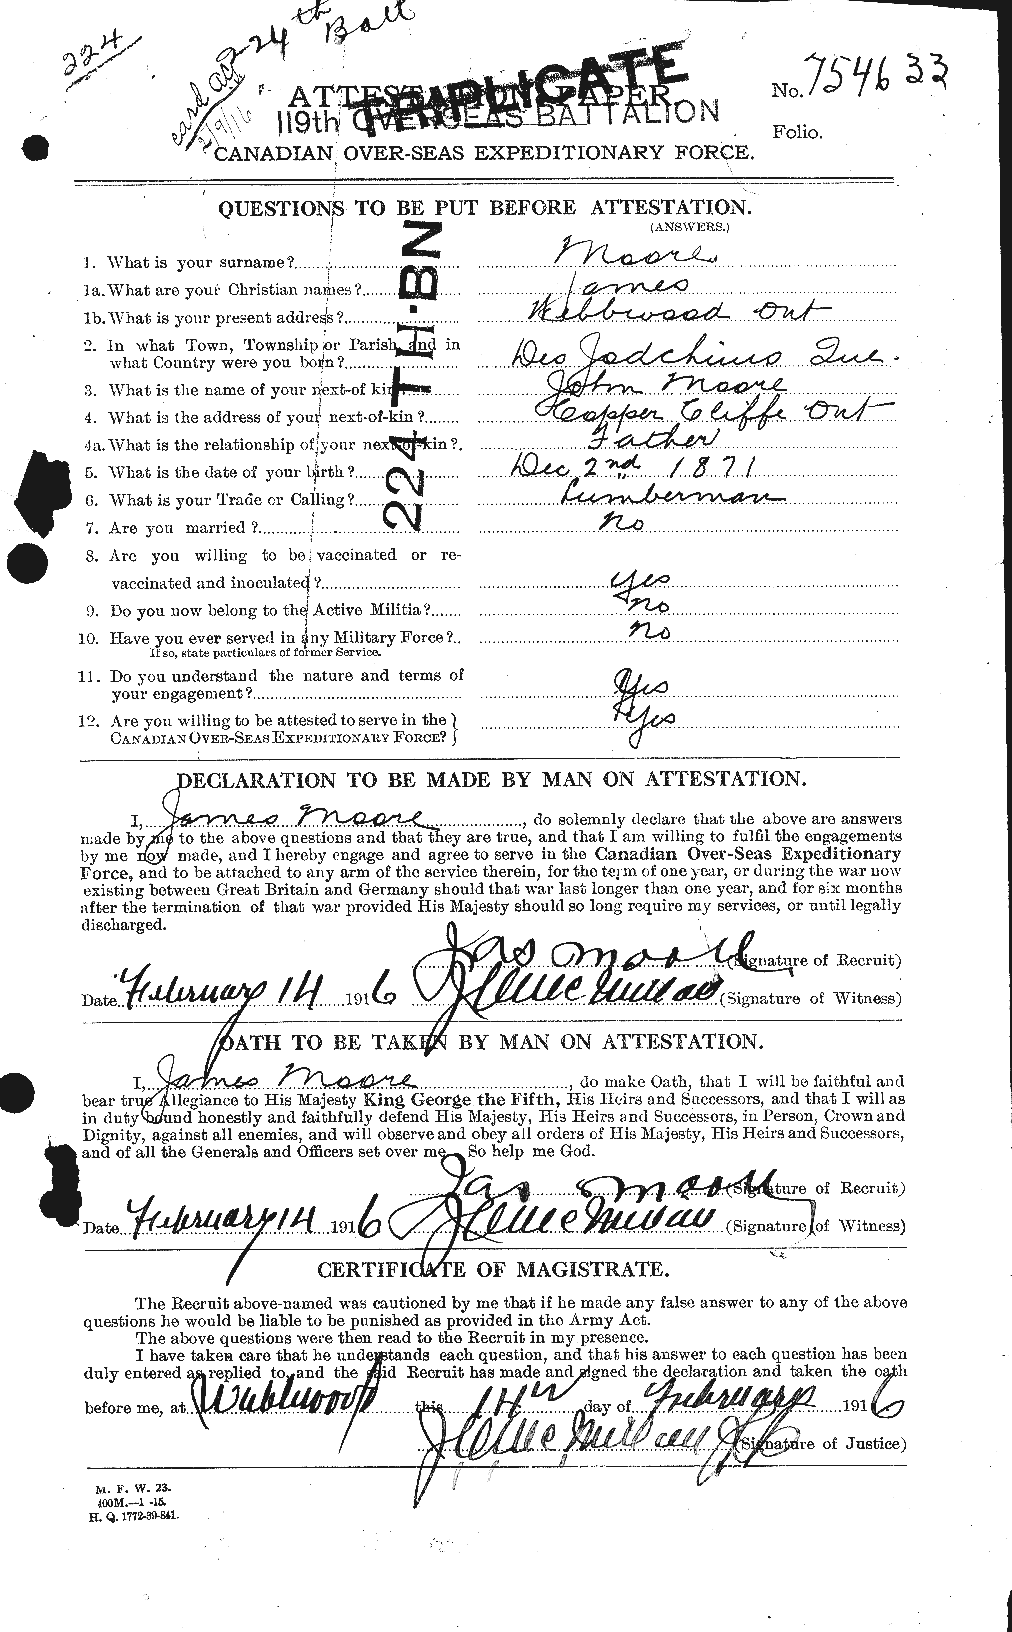 Personnel Records of the First World War - CEF 502169a